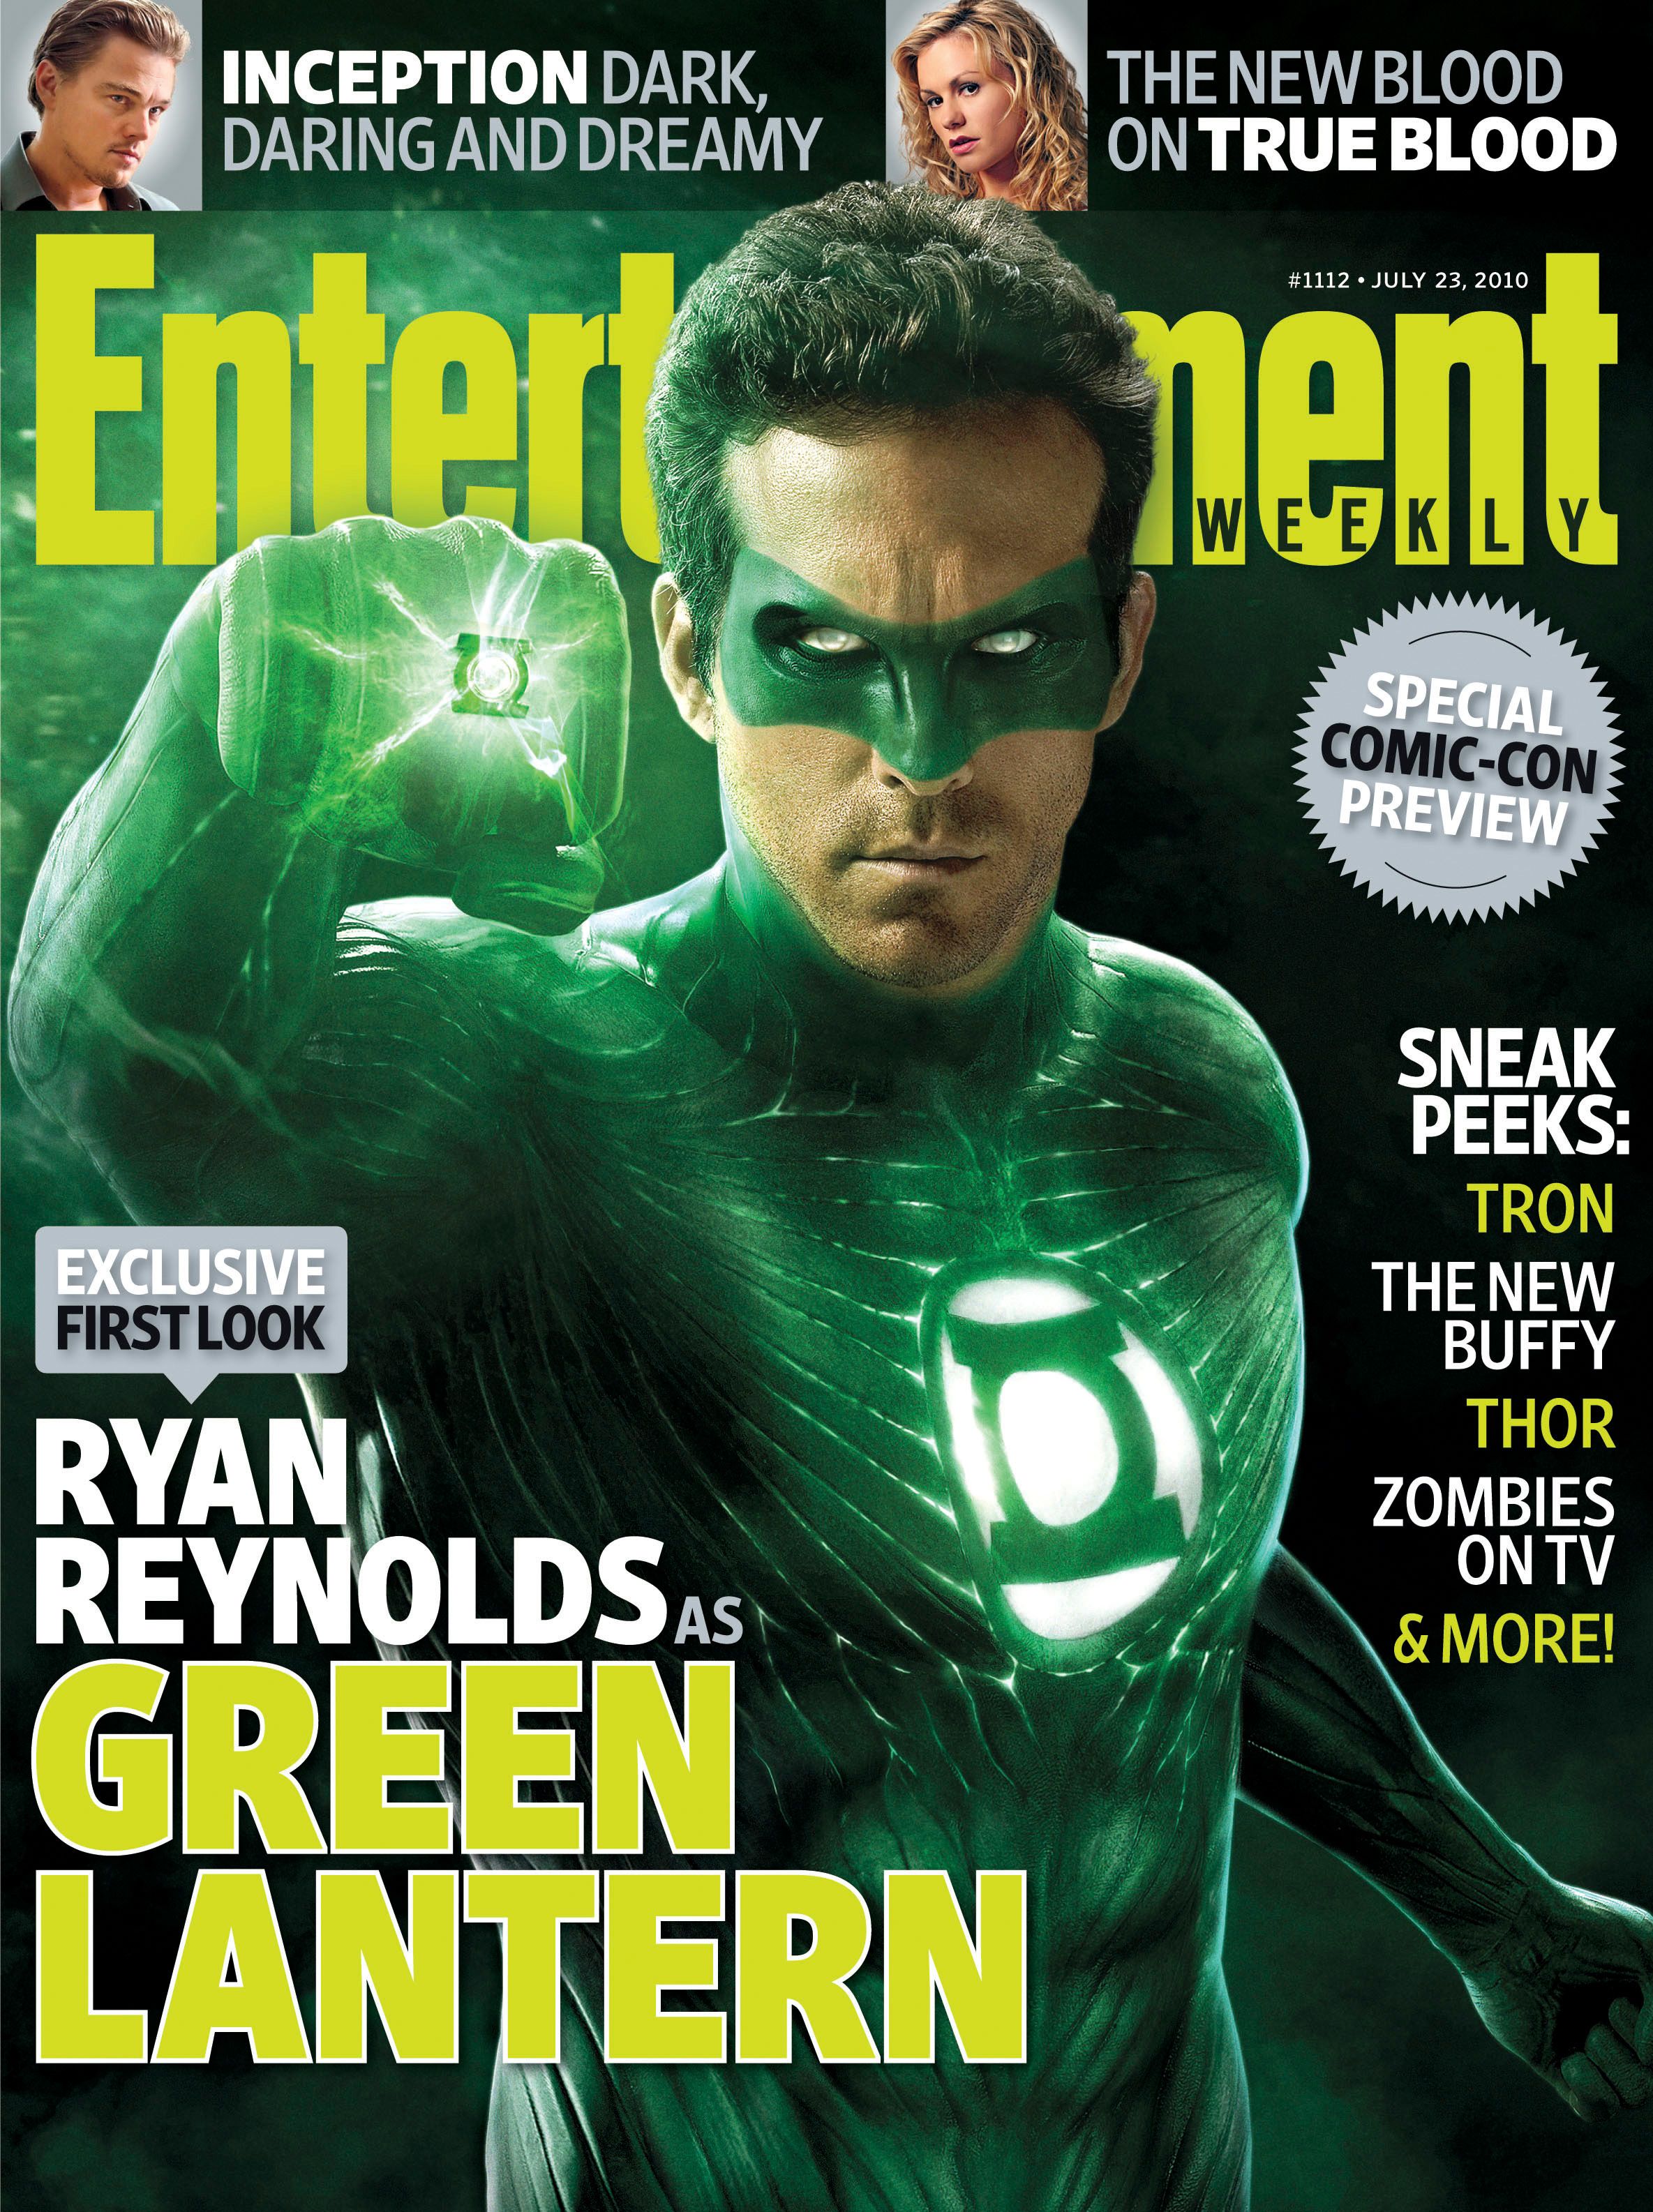 First Look at Ryan Reynolds as The Green Lantern